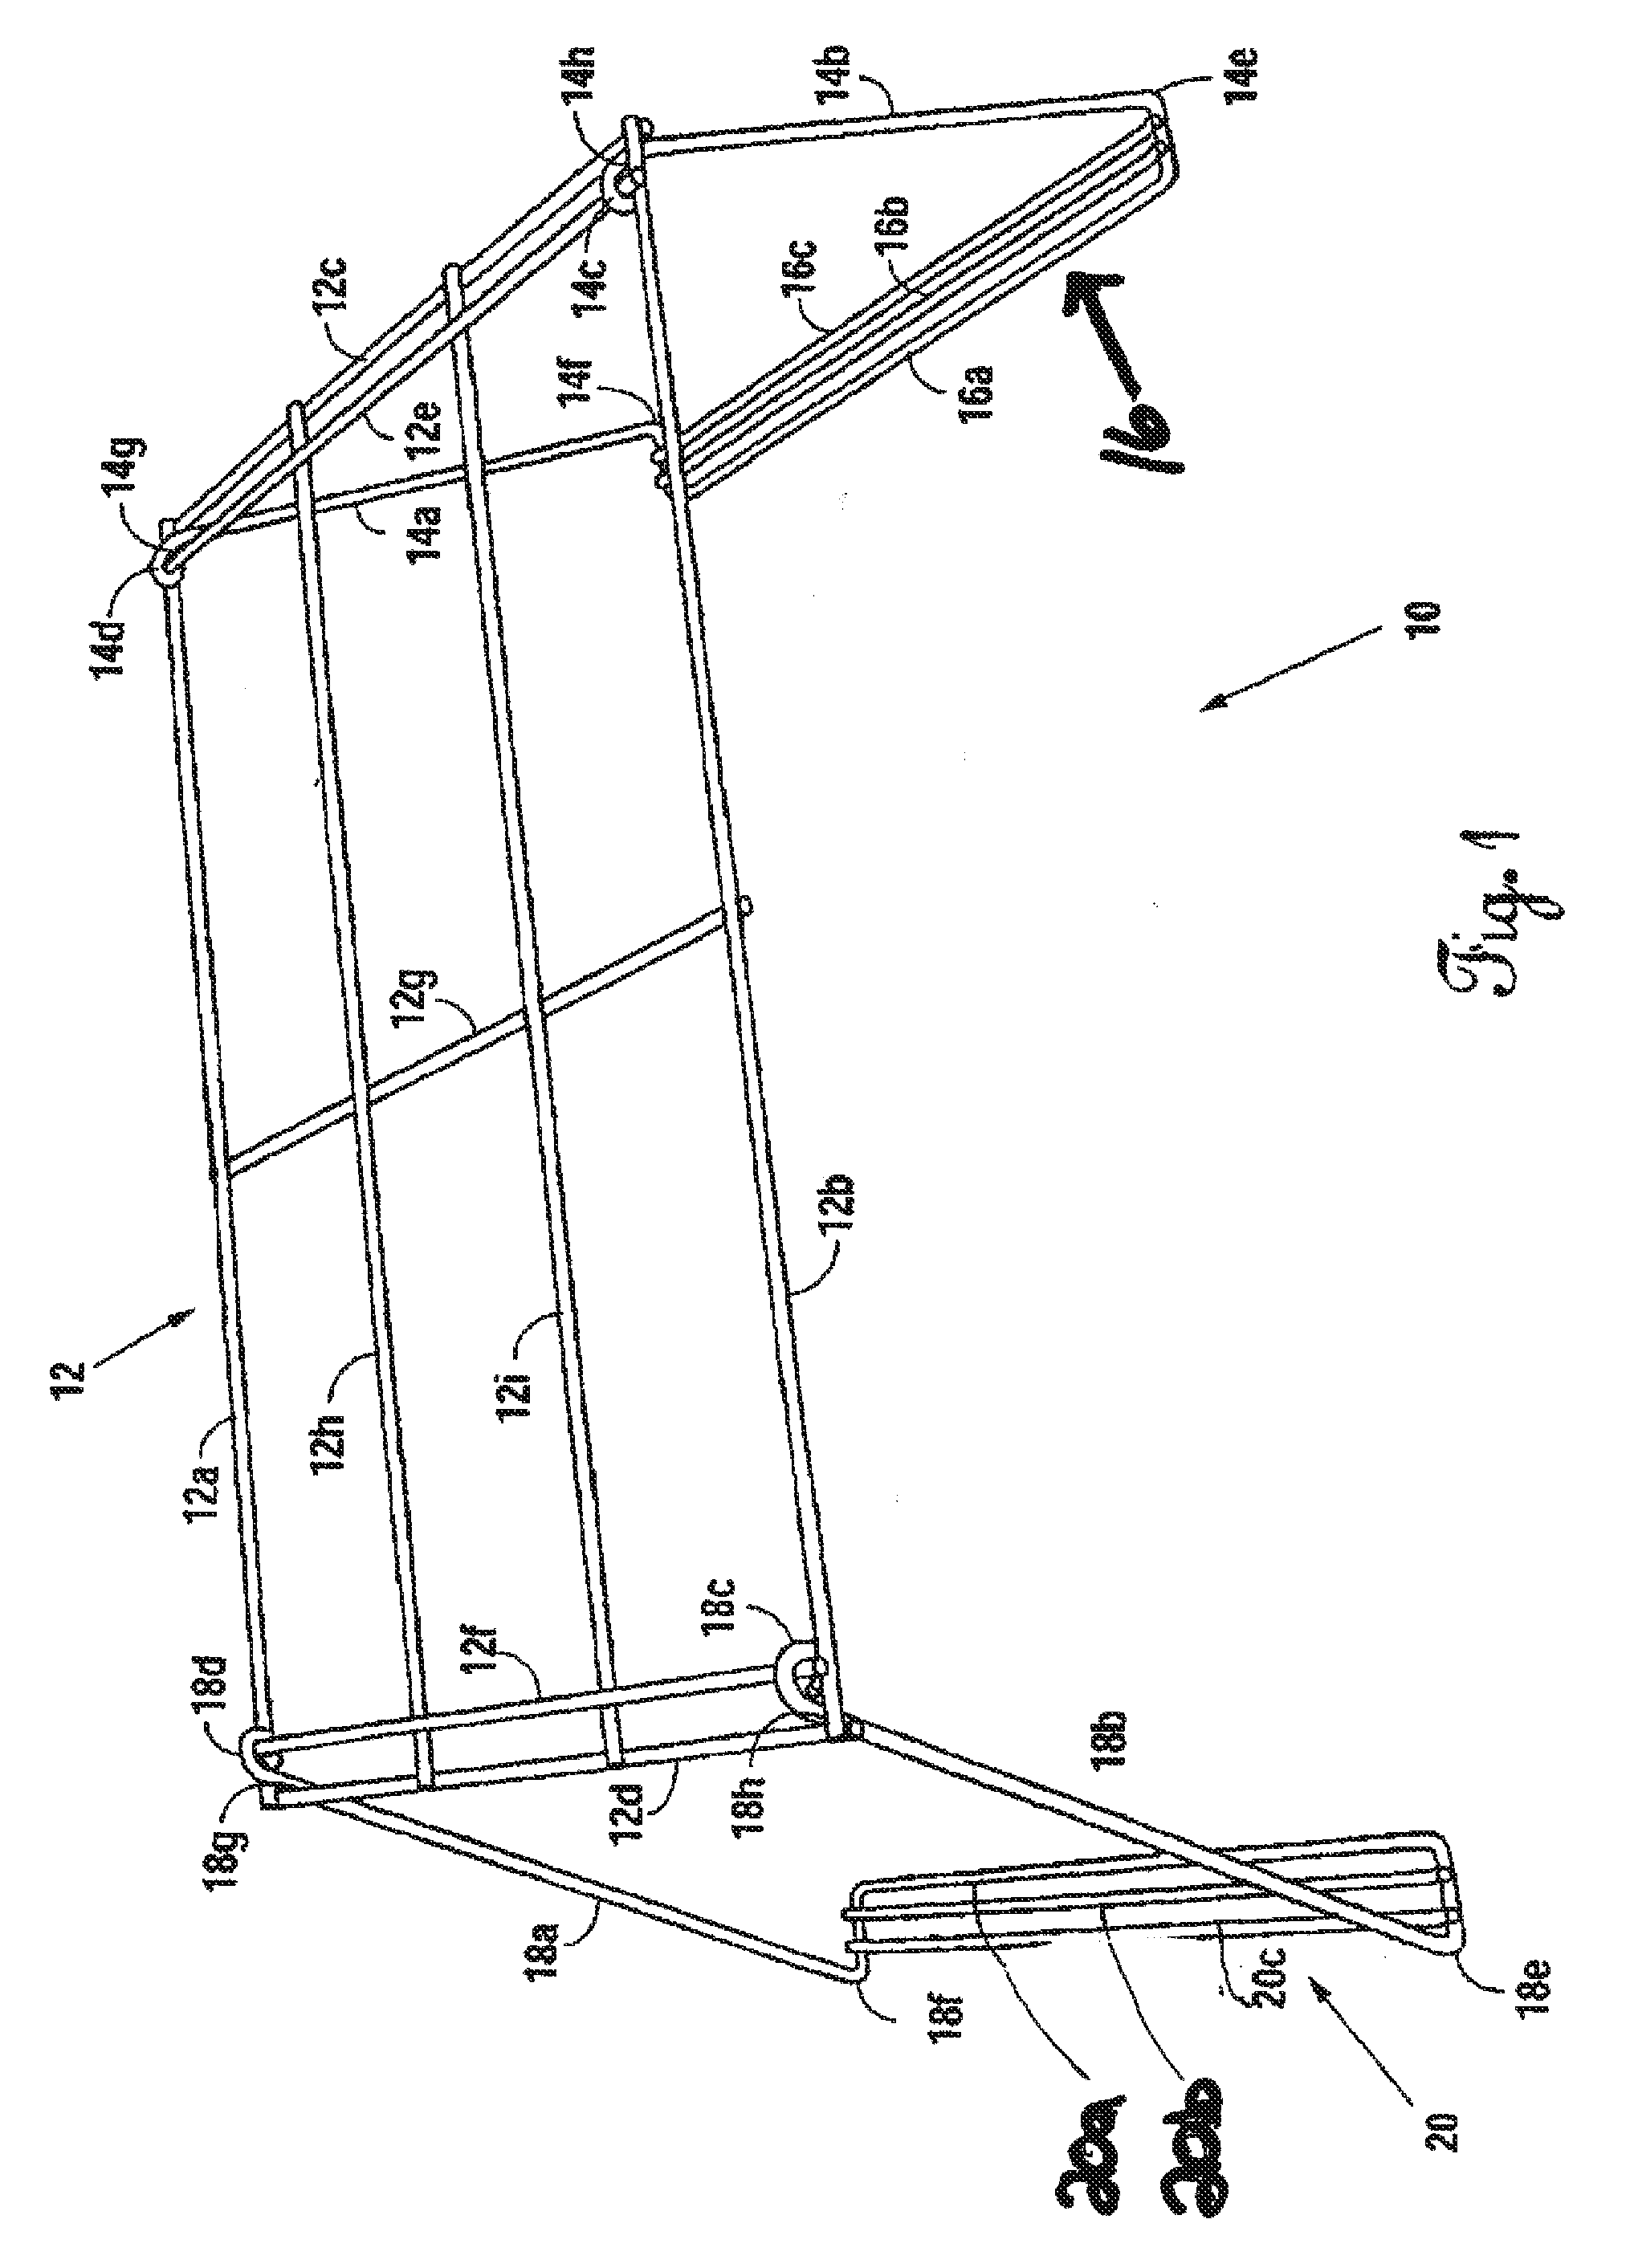 Folding foot protection device for a bedded patient